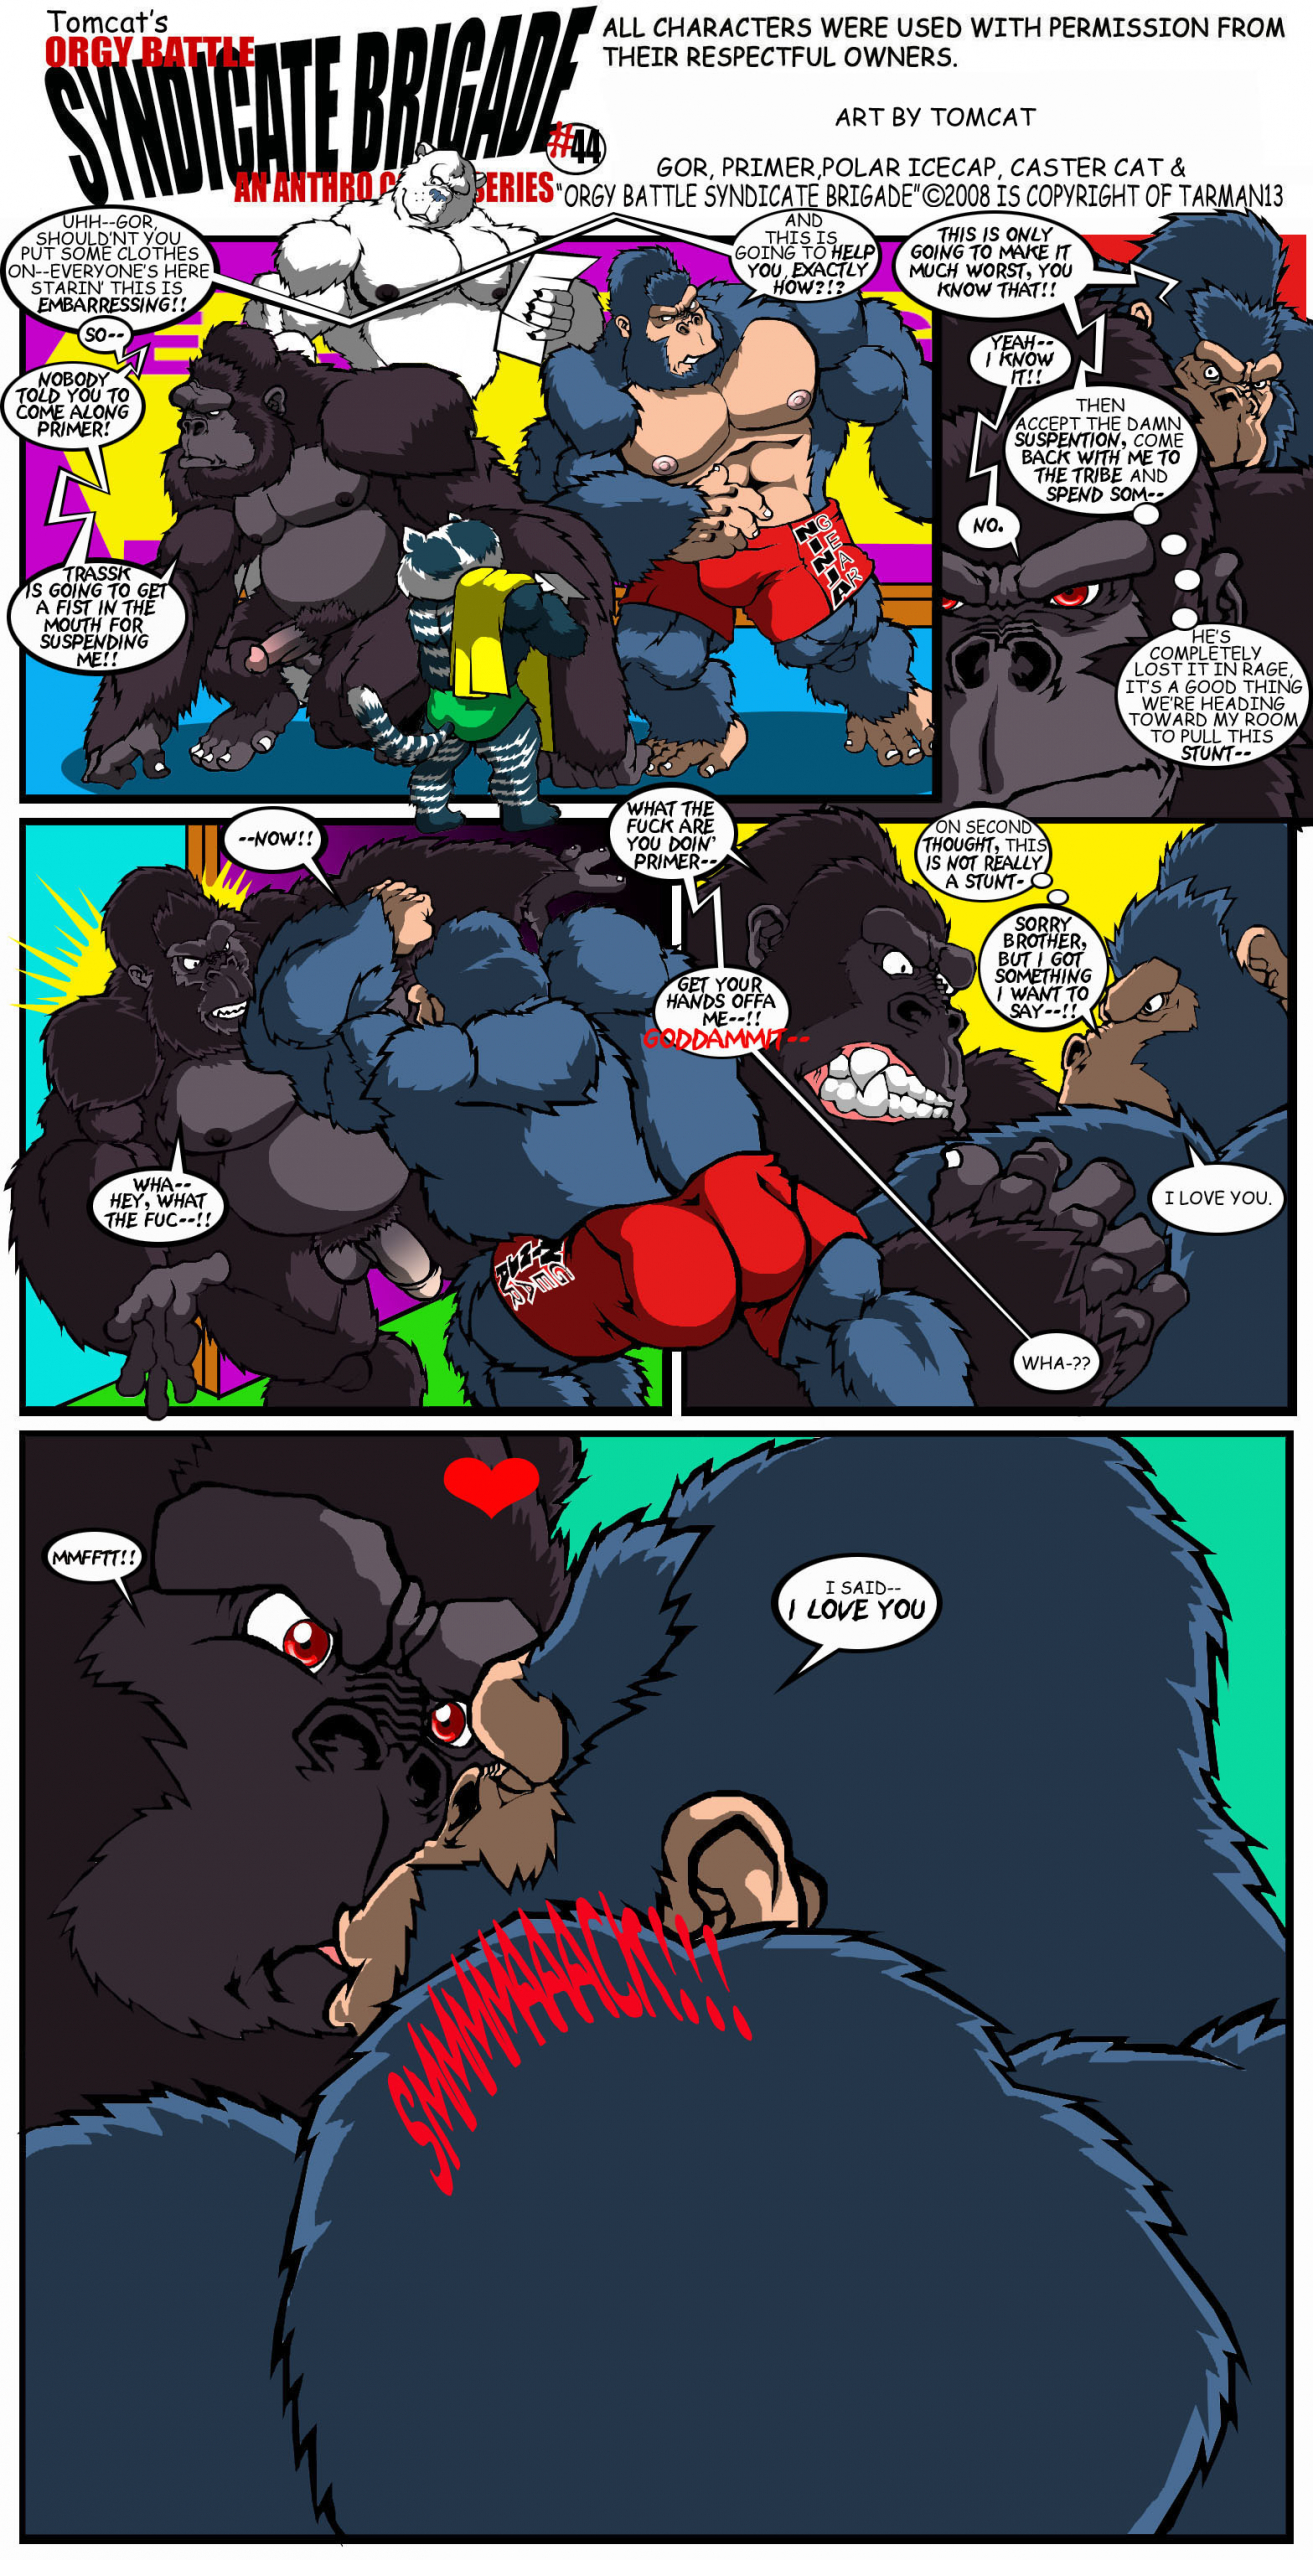 170296_Tomcat_syndicate_comic_page_44.1